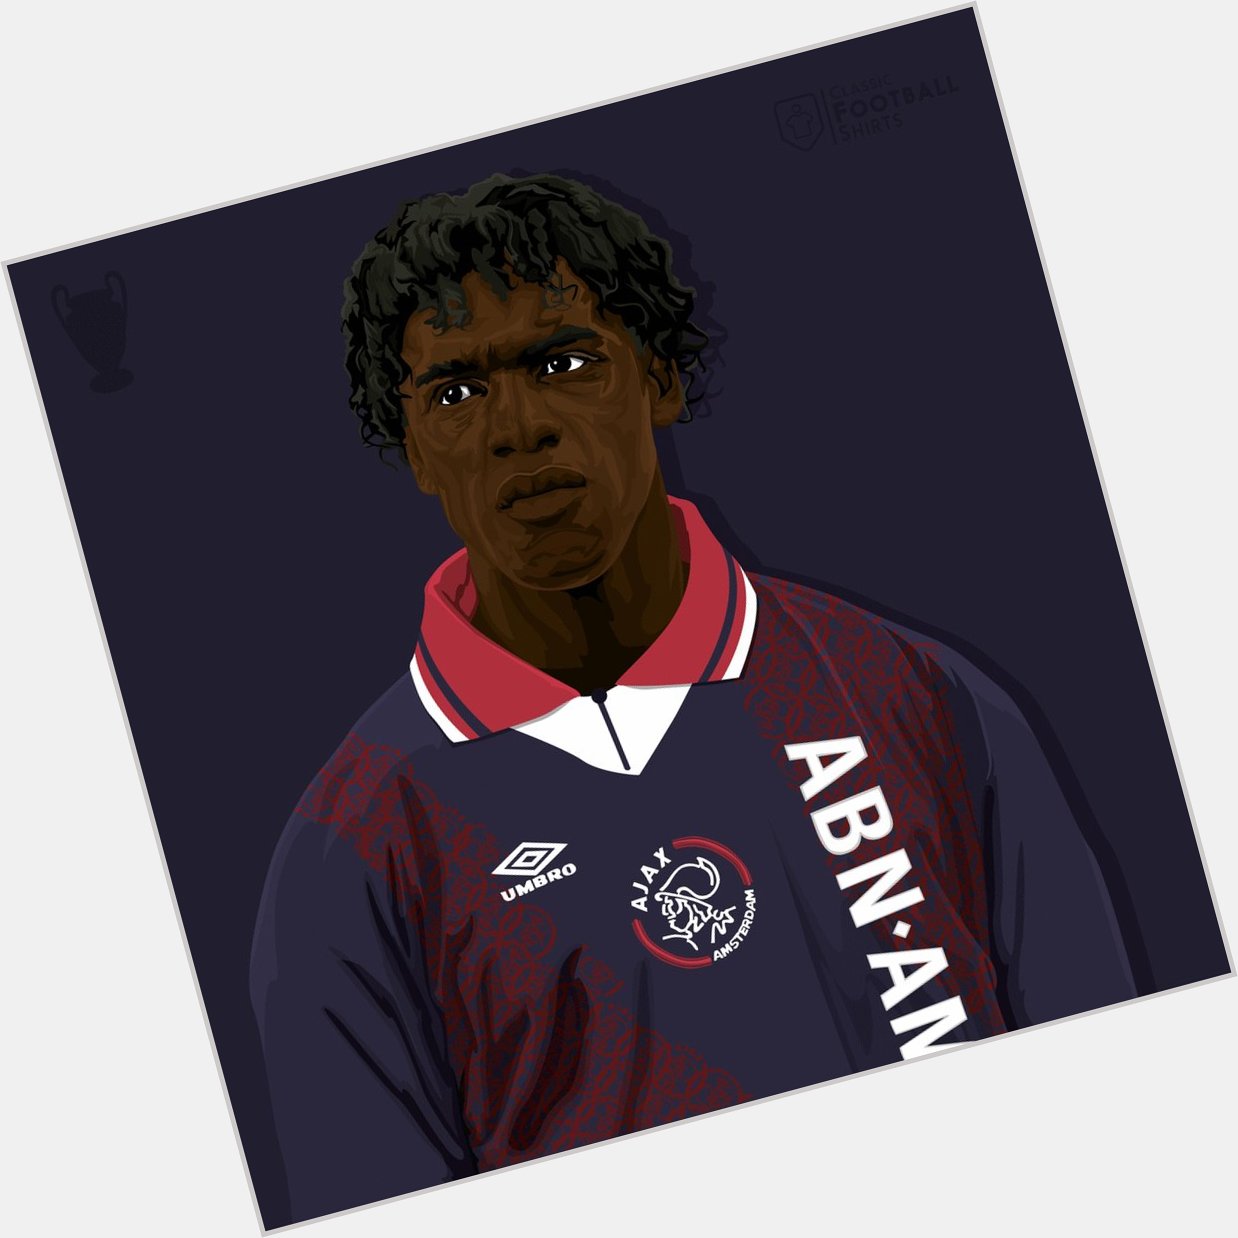 Happy Birthday Clarence Seedorf

4 times Champions League winner with 3 different clubs

Graphic 